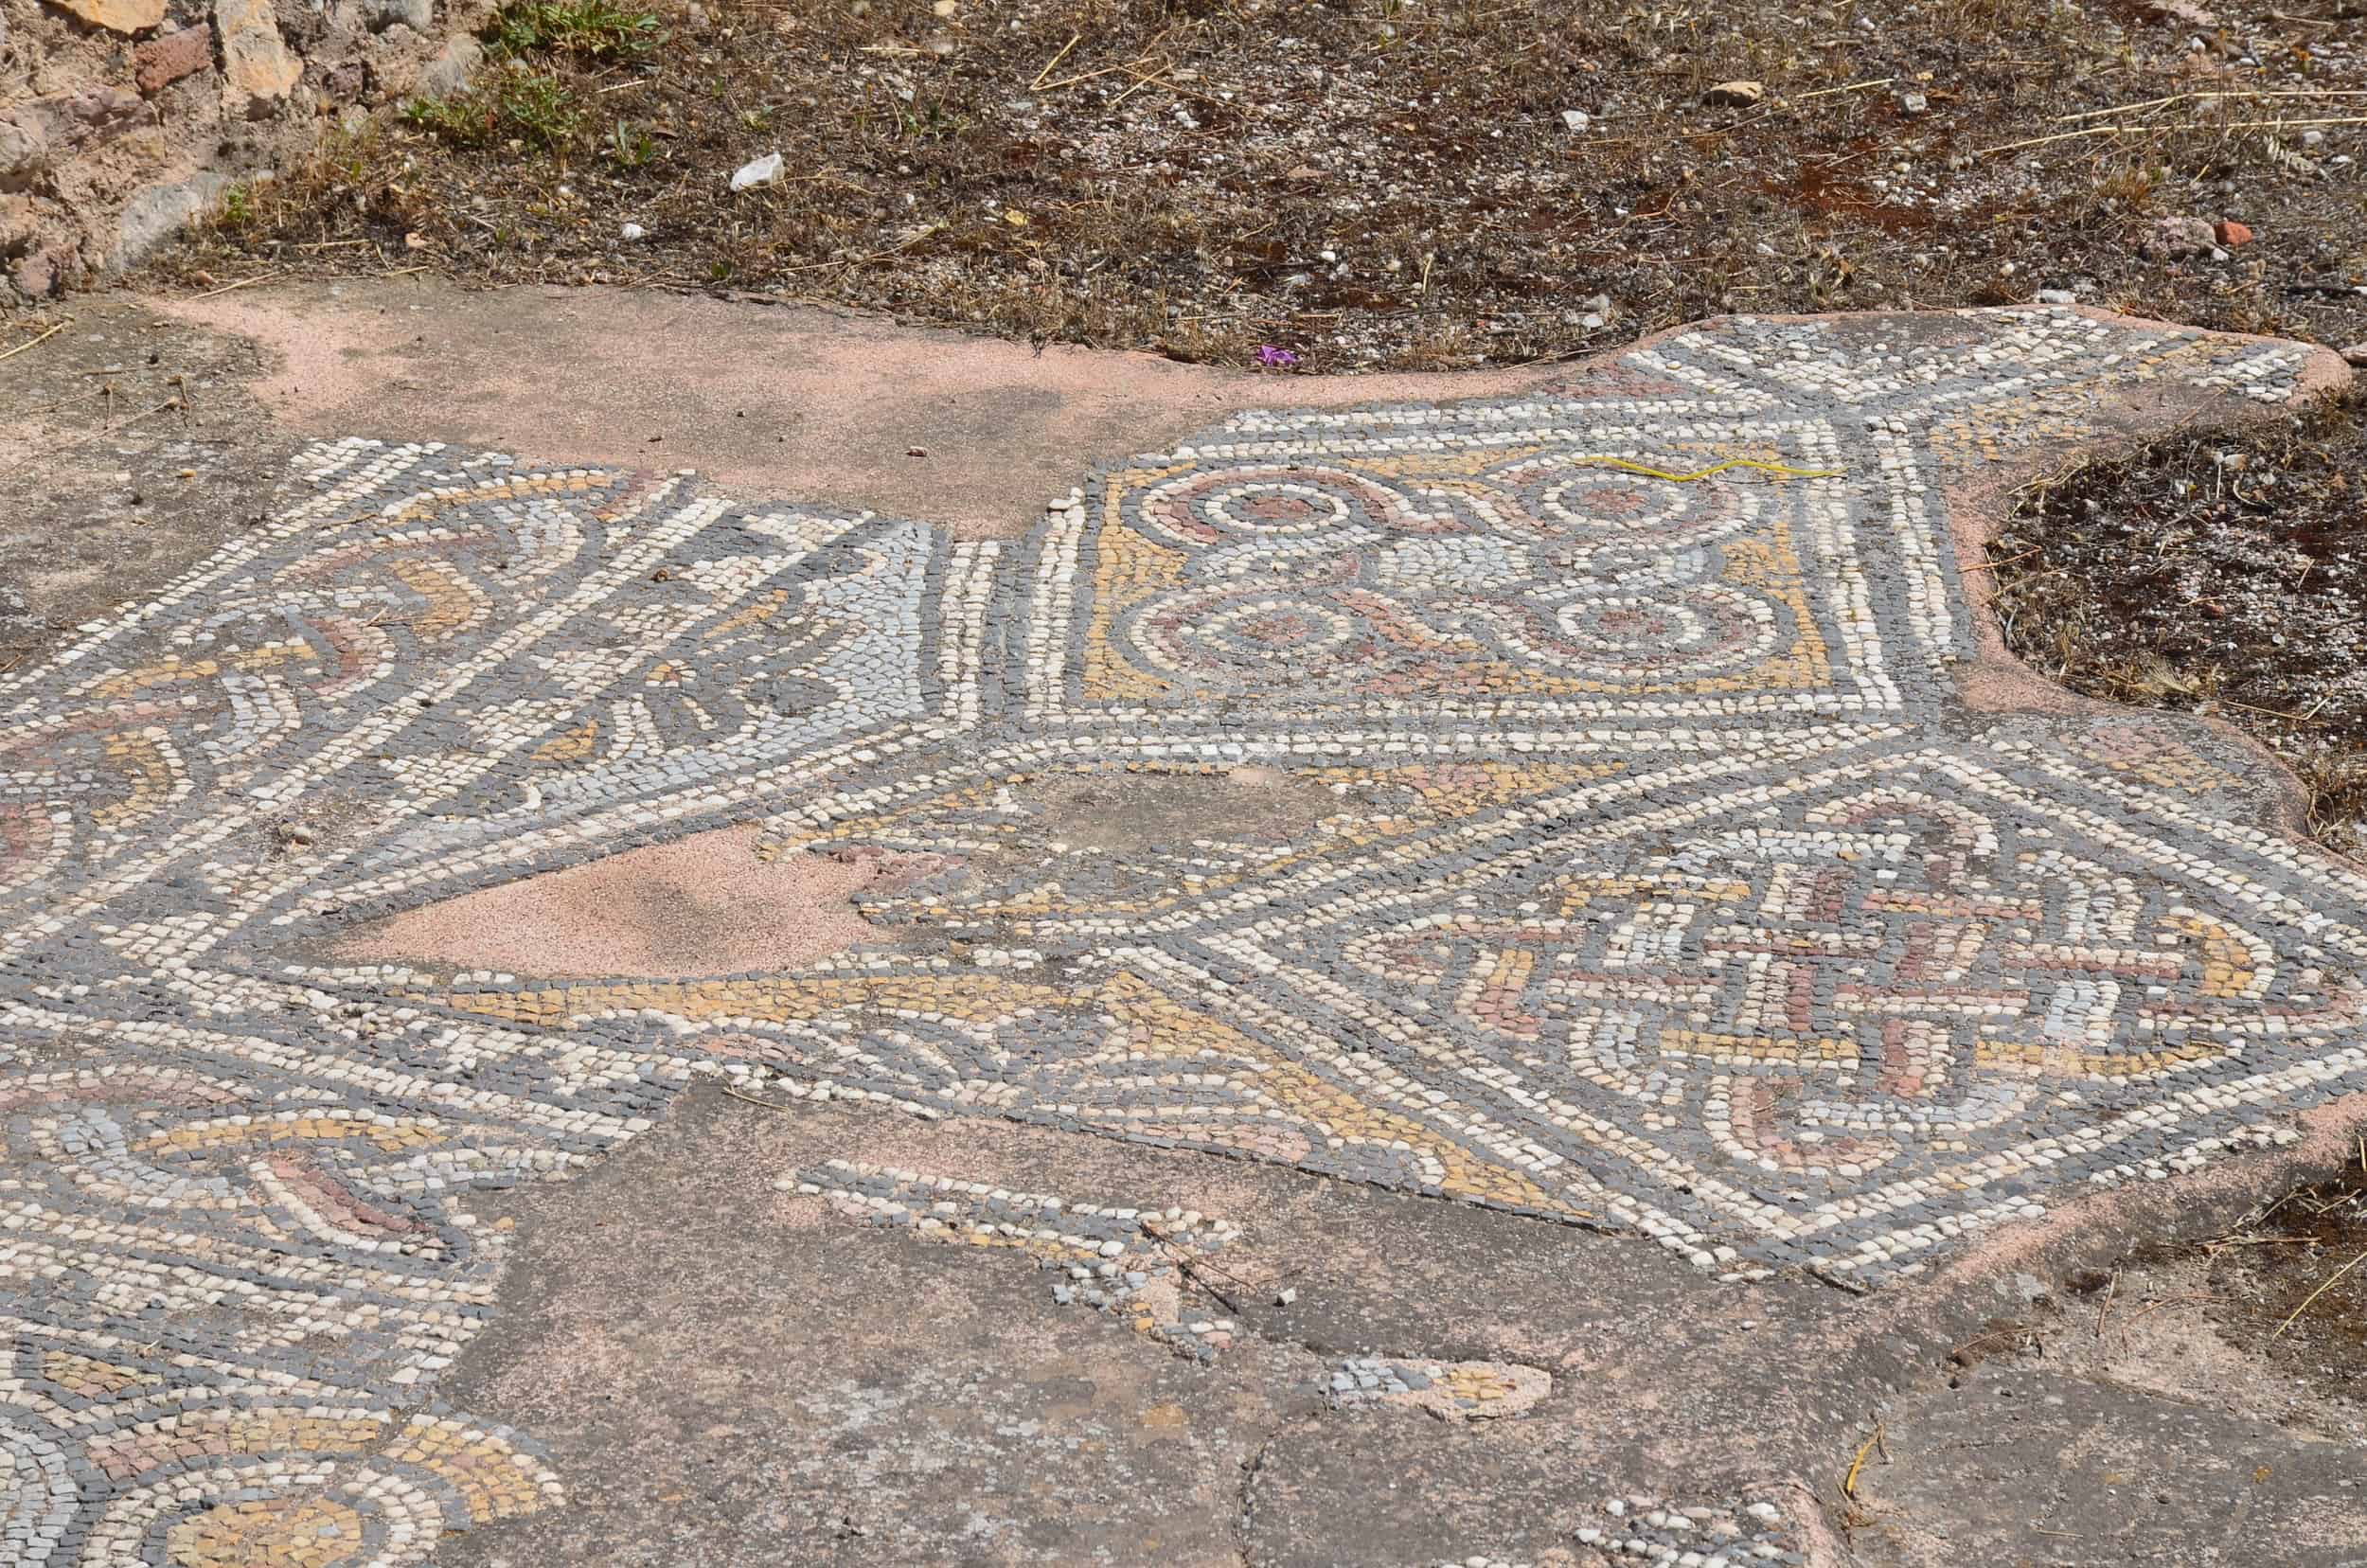 Mosaic floor of the tetraconch church at Hadrian's Library in Athens, Greece